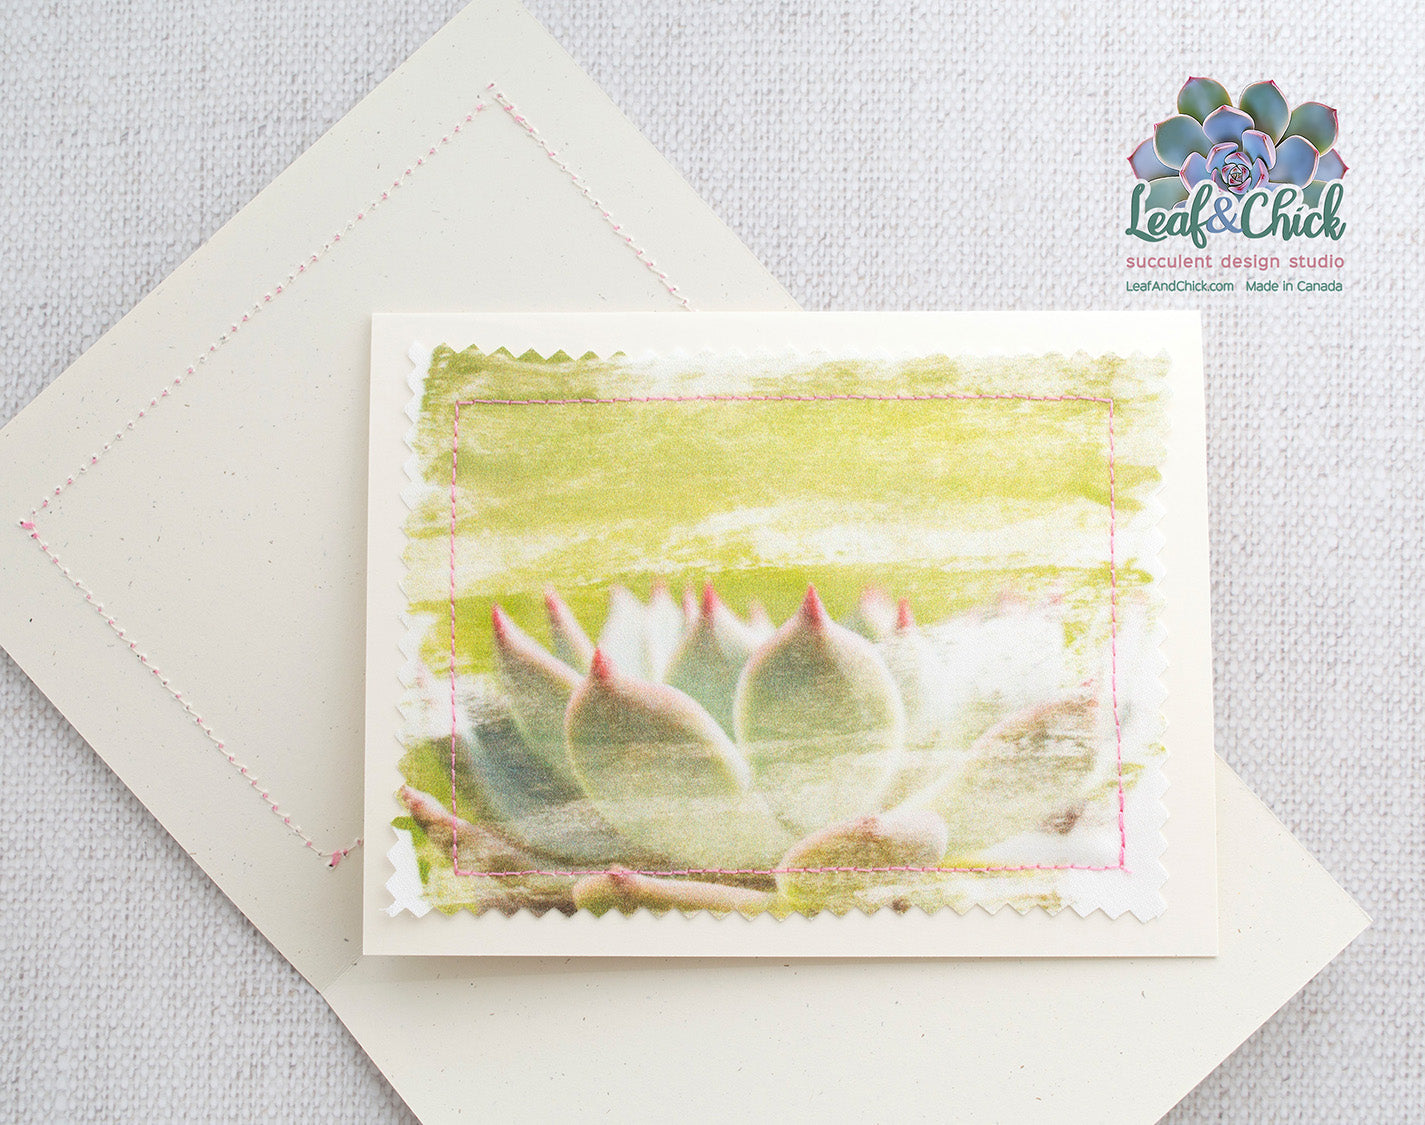 printed fabric succulent greeting card by Leaf & Chick